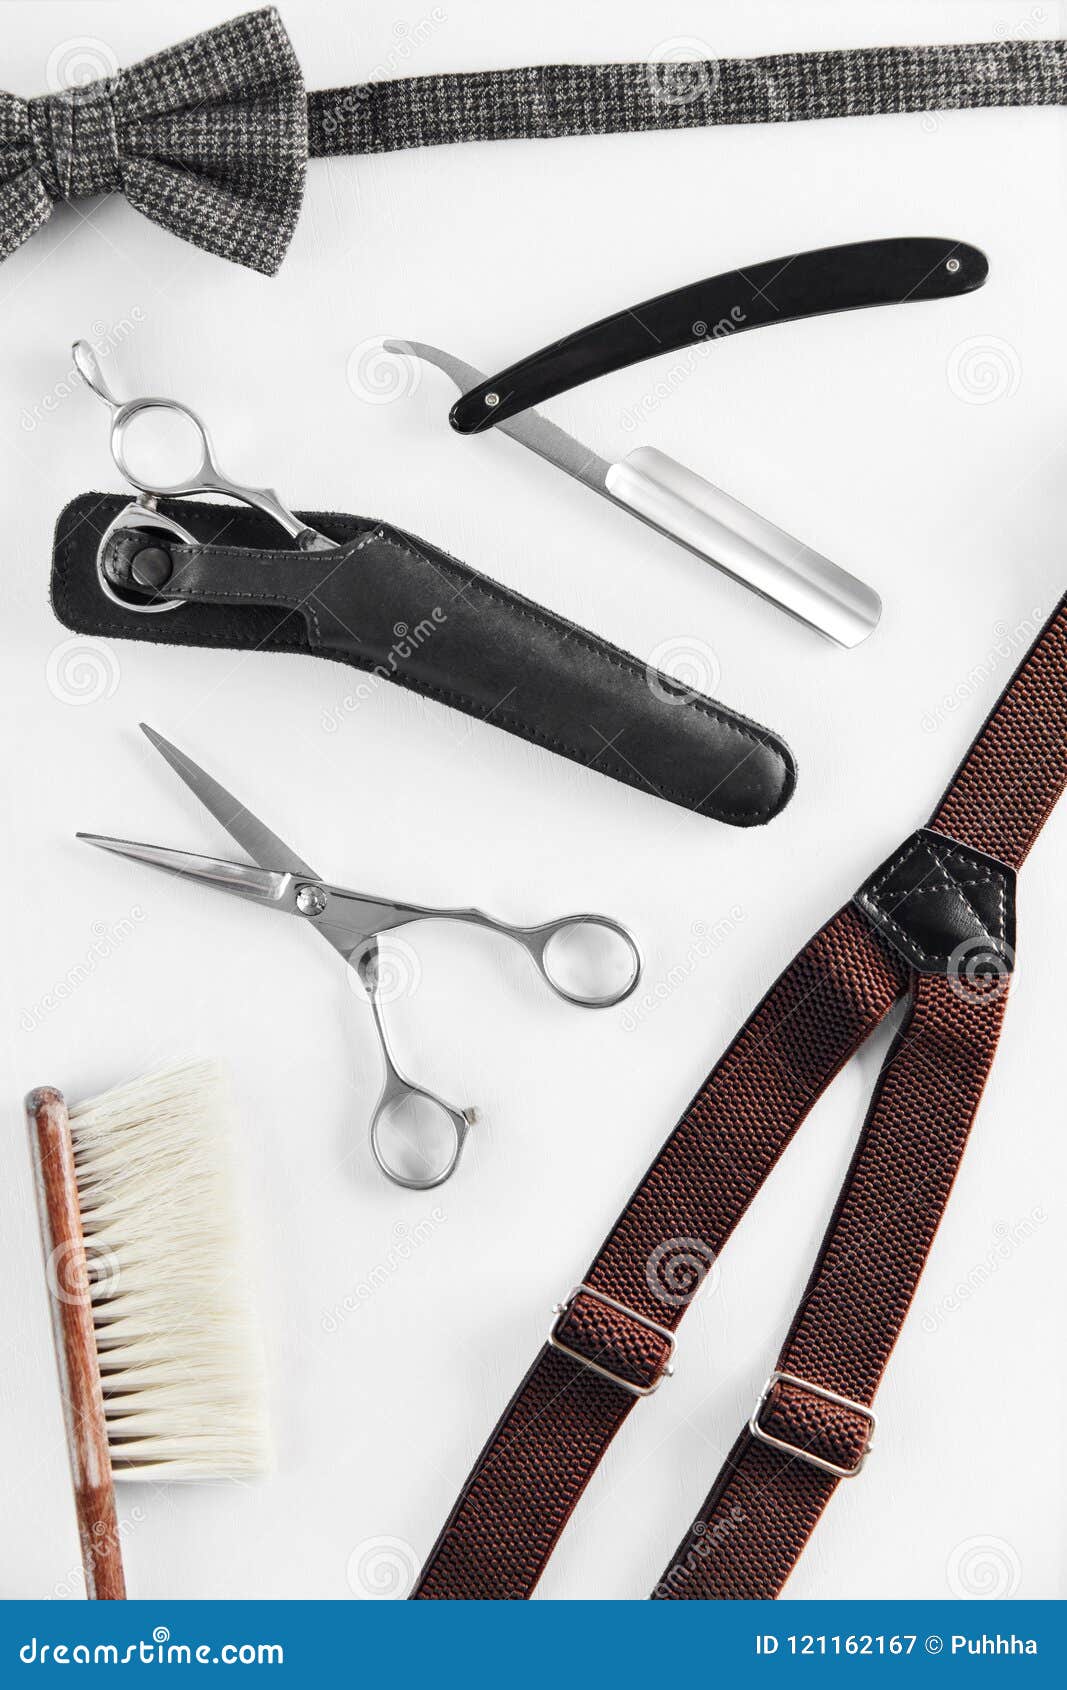 Barbershop Tools Barber Supplies And Equipment Stock Image